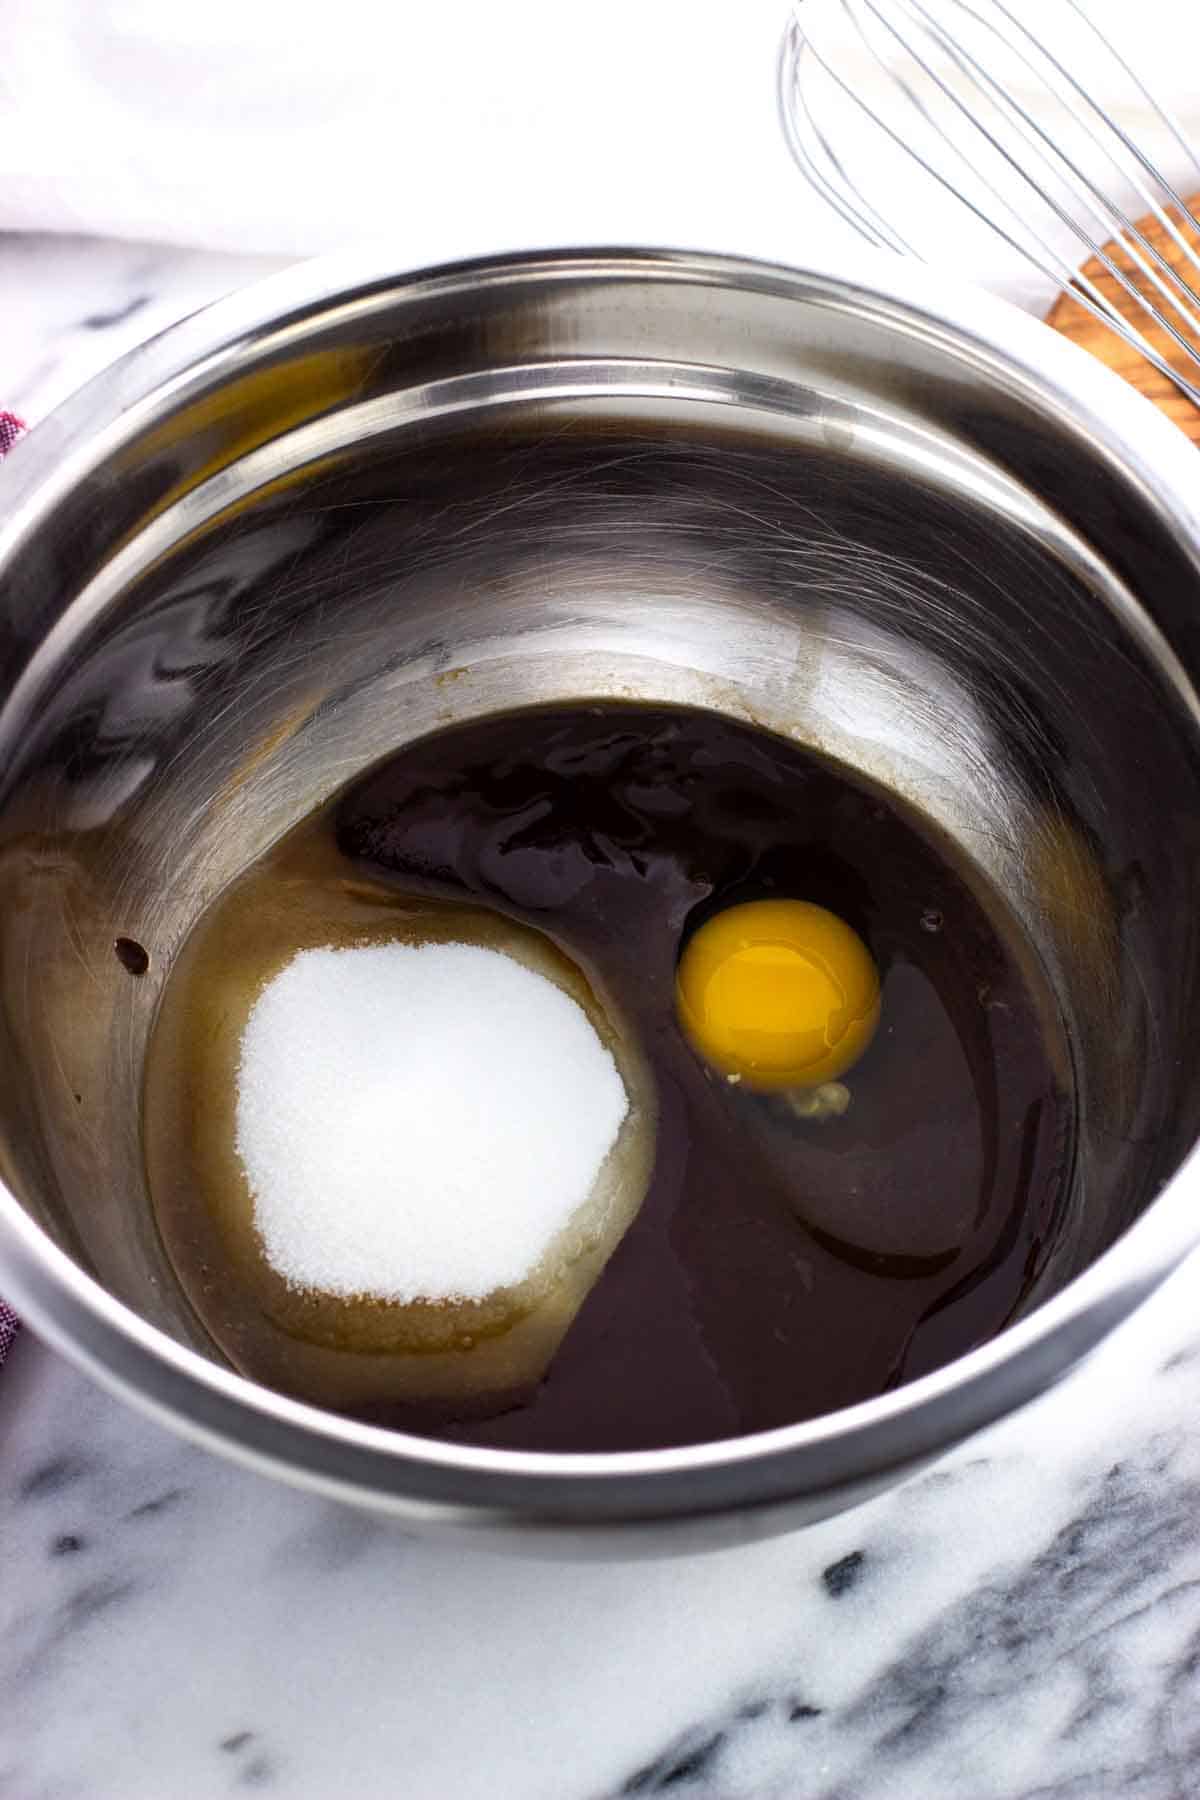 Melted buter/chocolate, sugar, egg, and vanilla in a metal mixing bowl.